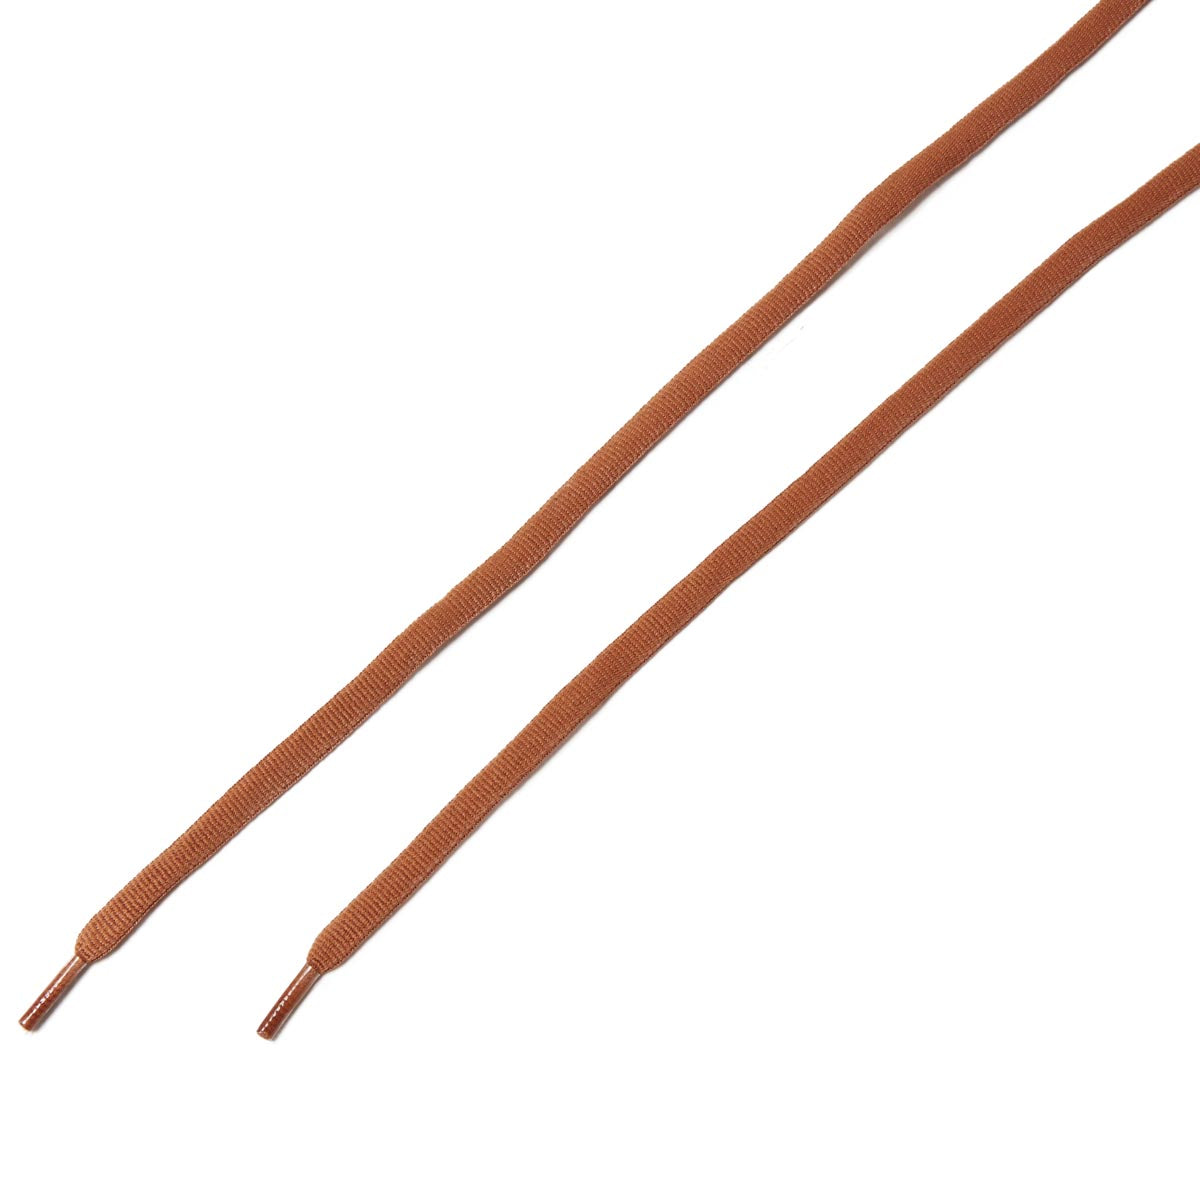 CCS Oval Shoelaces - Brown image 2